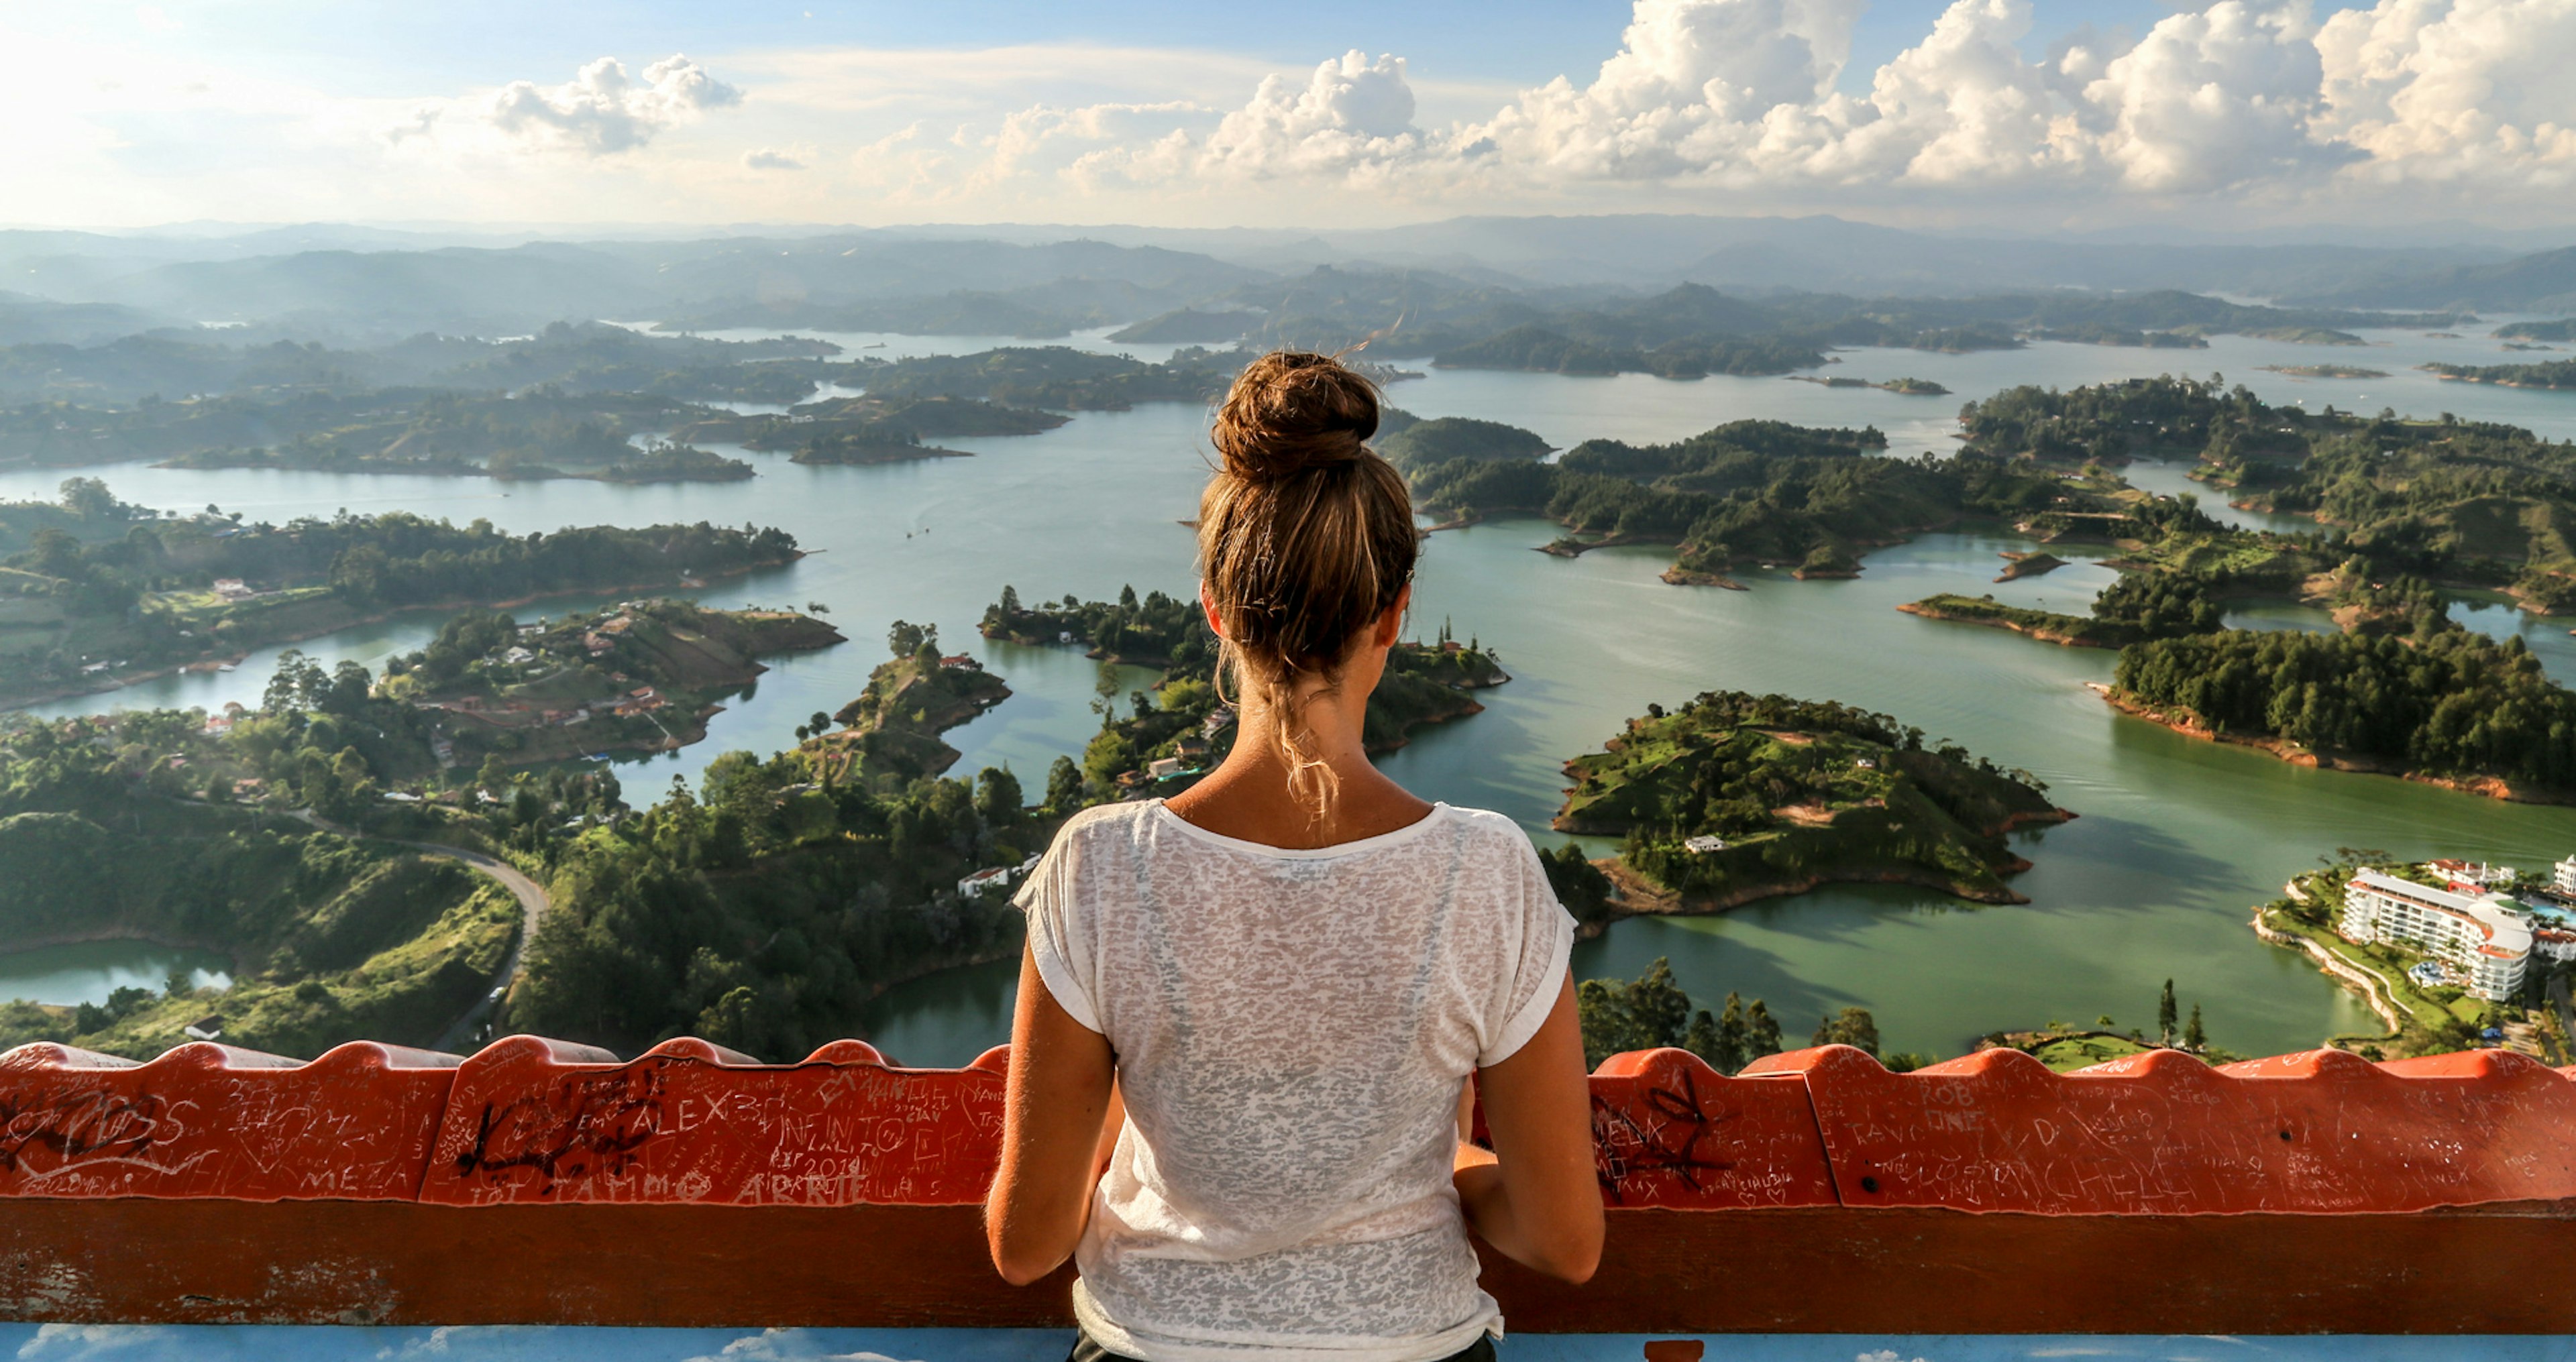 Getting around in Colombia - Lonely Planet